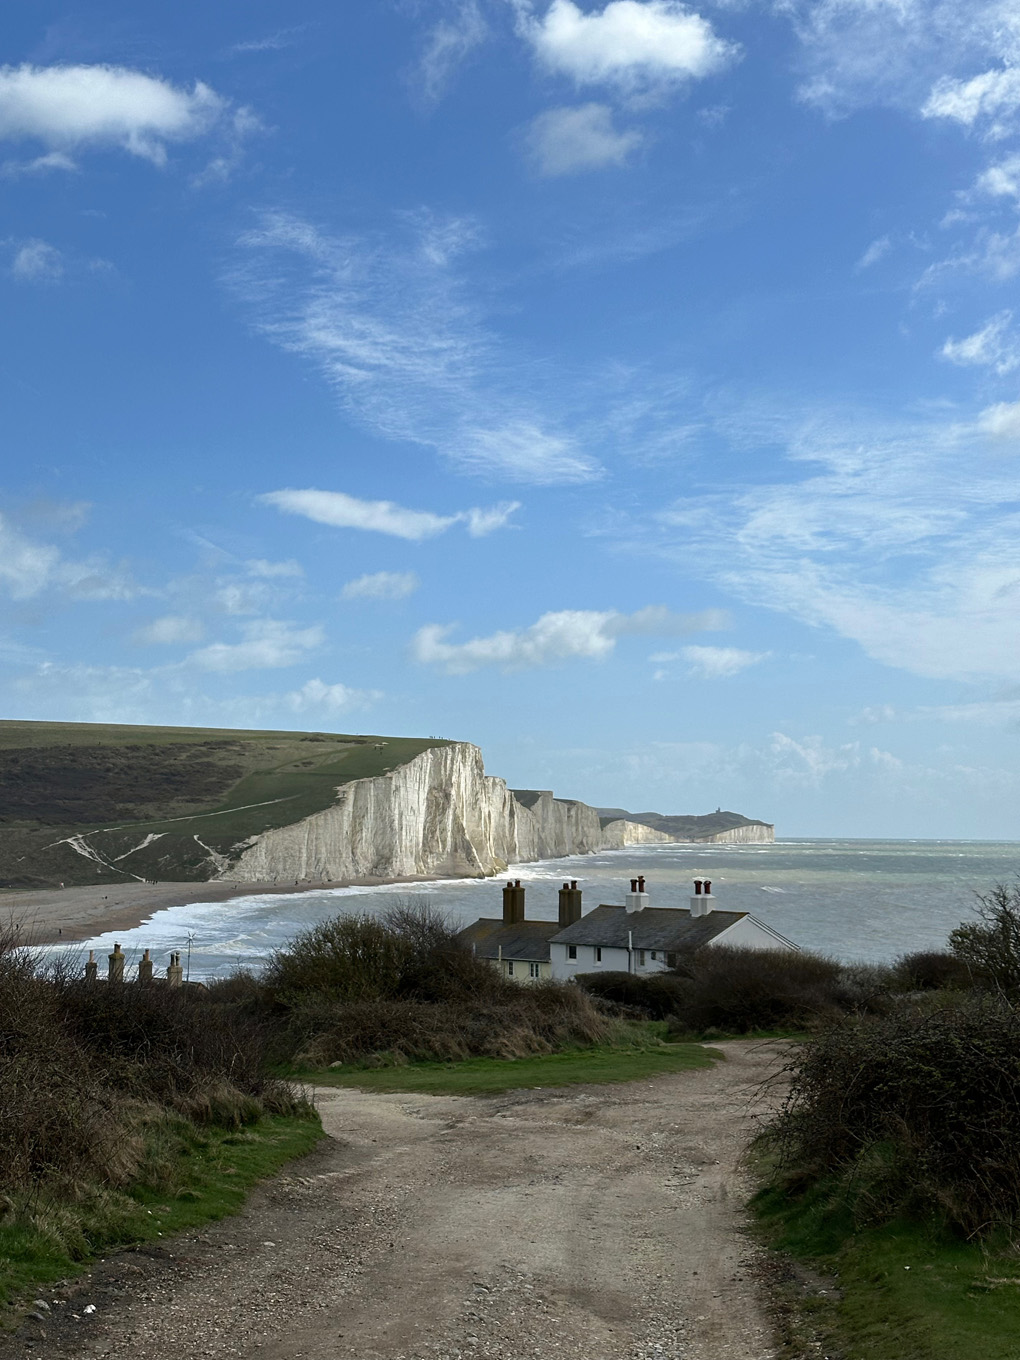 A view of the white cliffs which make up the Seven Sisters from the Seaford end with a train and houses in the foreground. Cliffs and sea going into the distance with mostly blue skies.